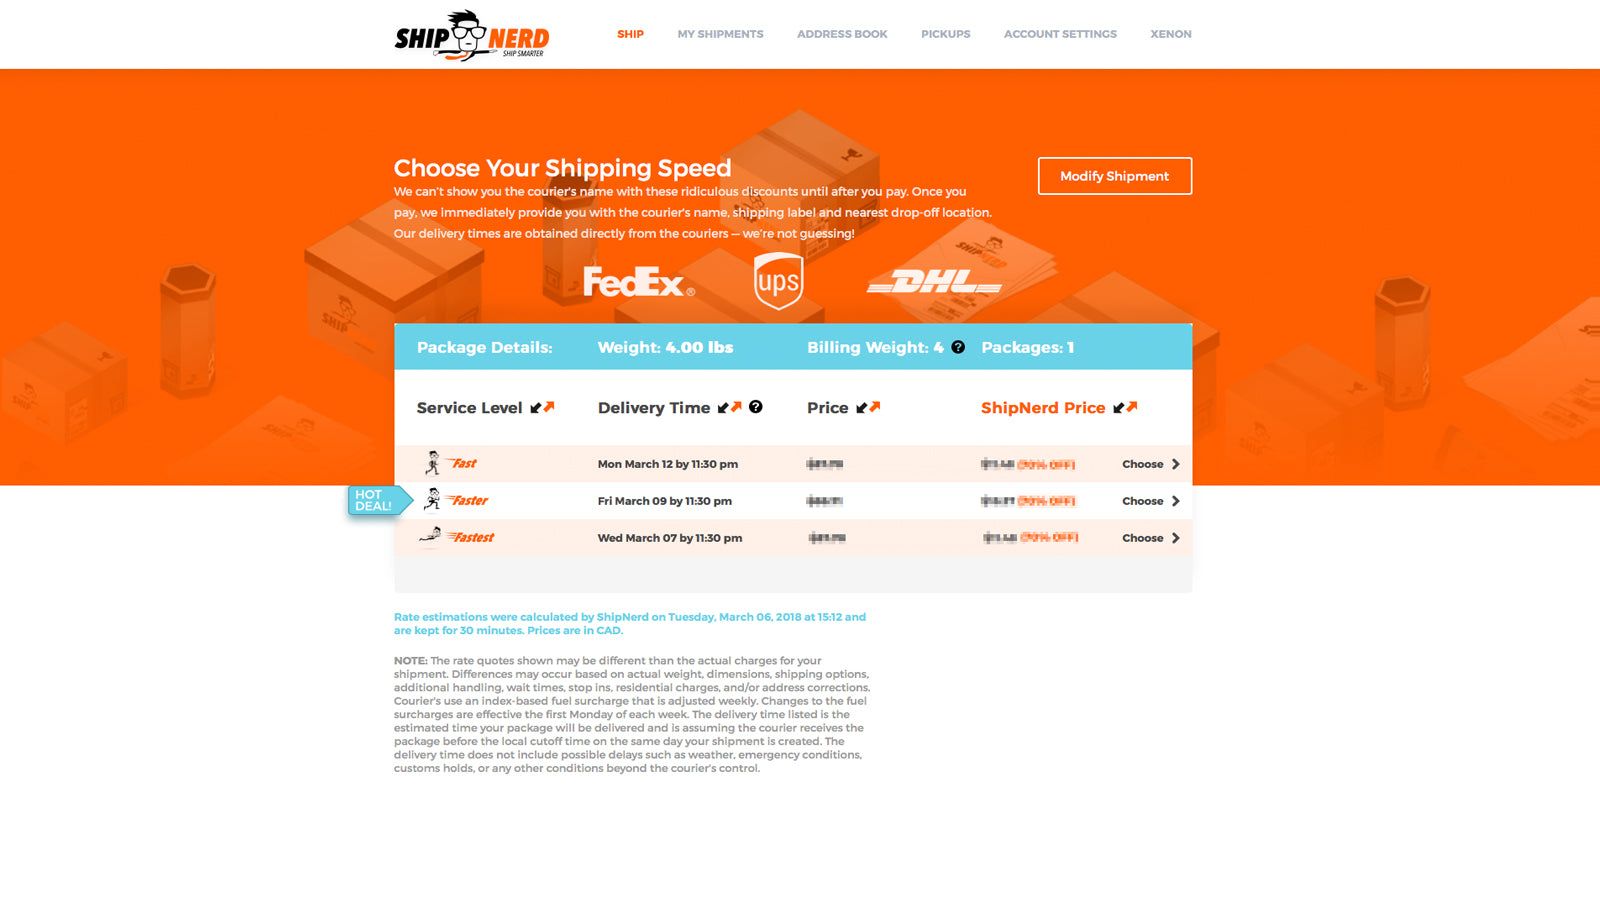 Real time shipping costs and transit times